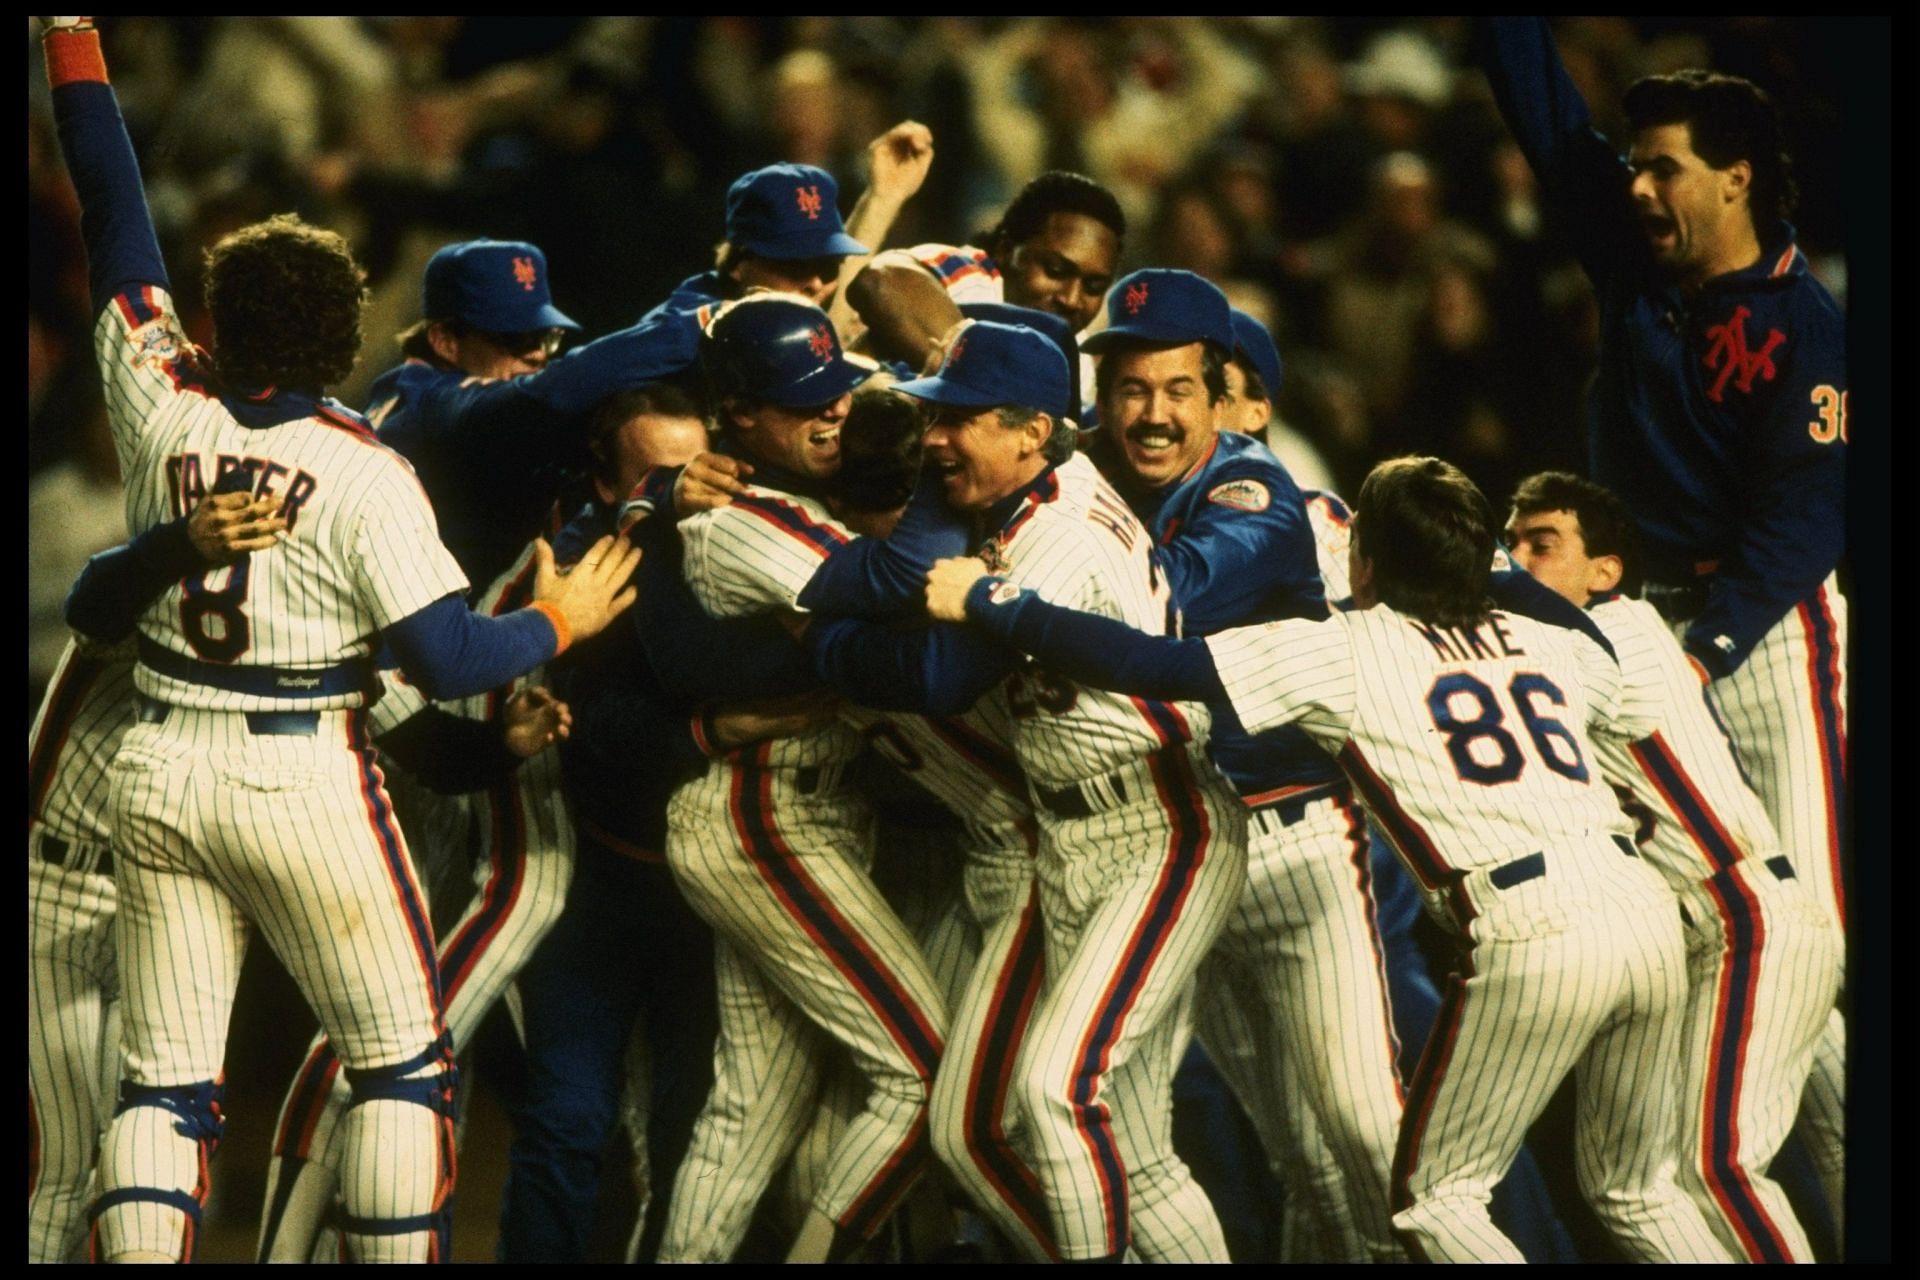 1986 Mets recall time they trashed team plane after winning